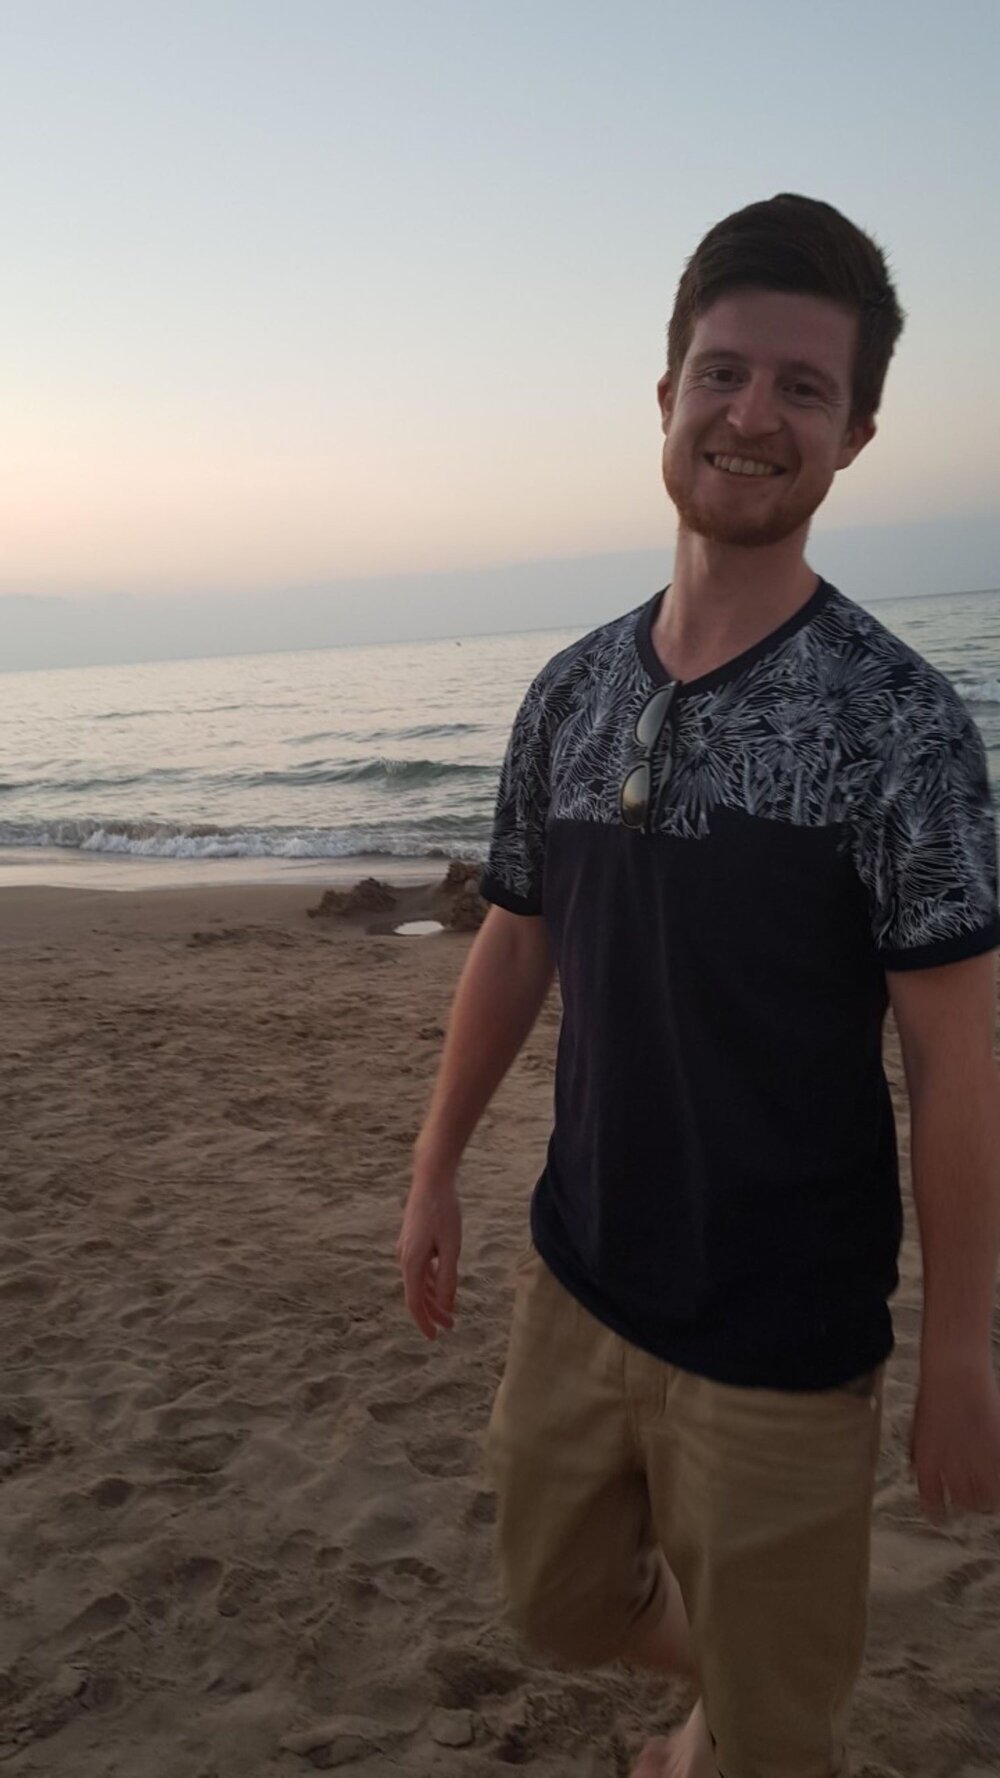 Alex enjoying the sunset on Denia Beach 2018. The sea can be see in the background. Photo: Alex Waite